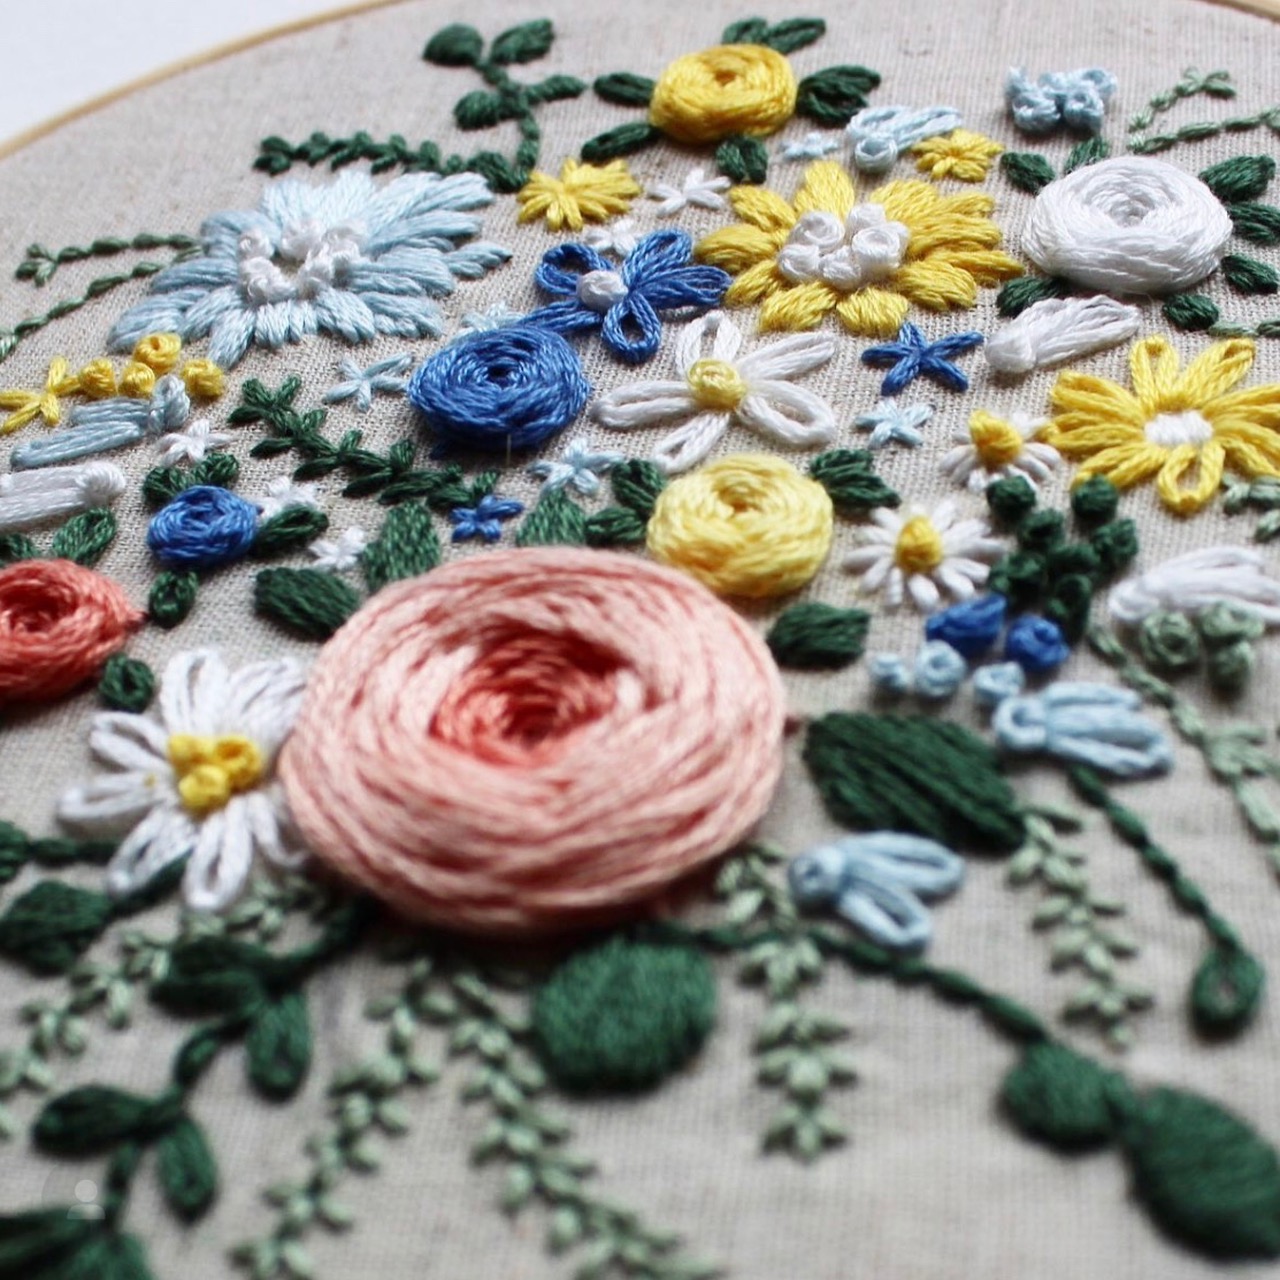 Intermediate Hand Embroidery Classes in Sydney